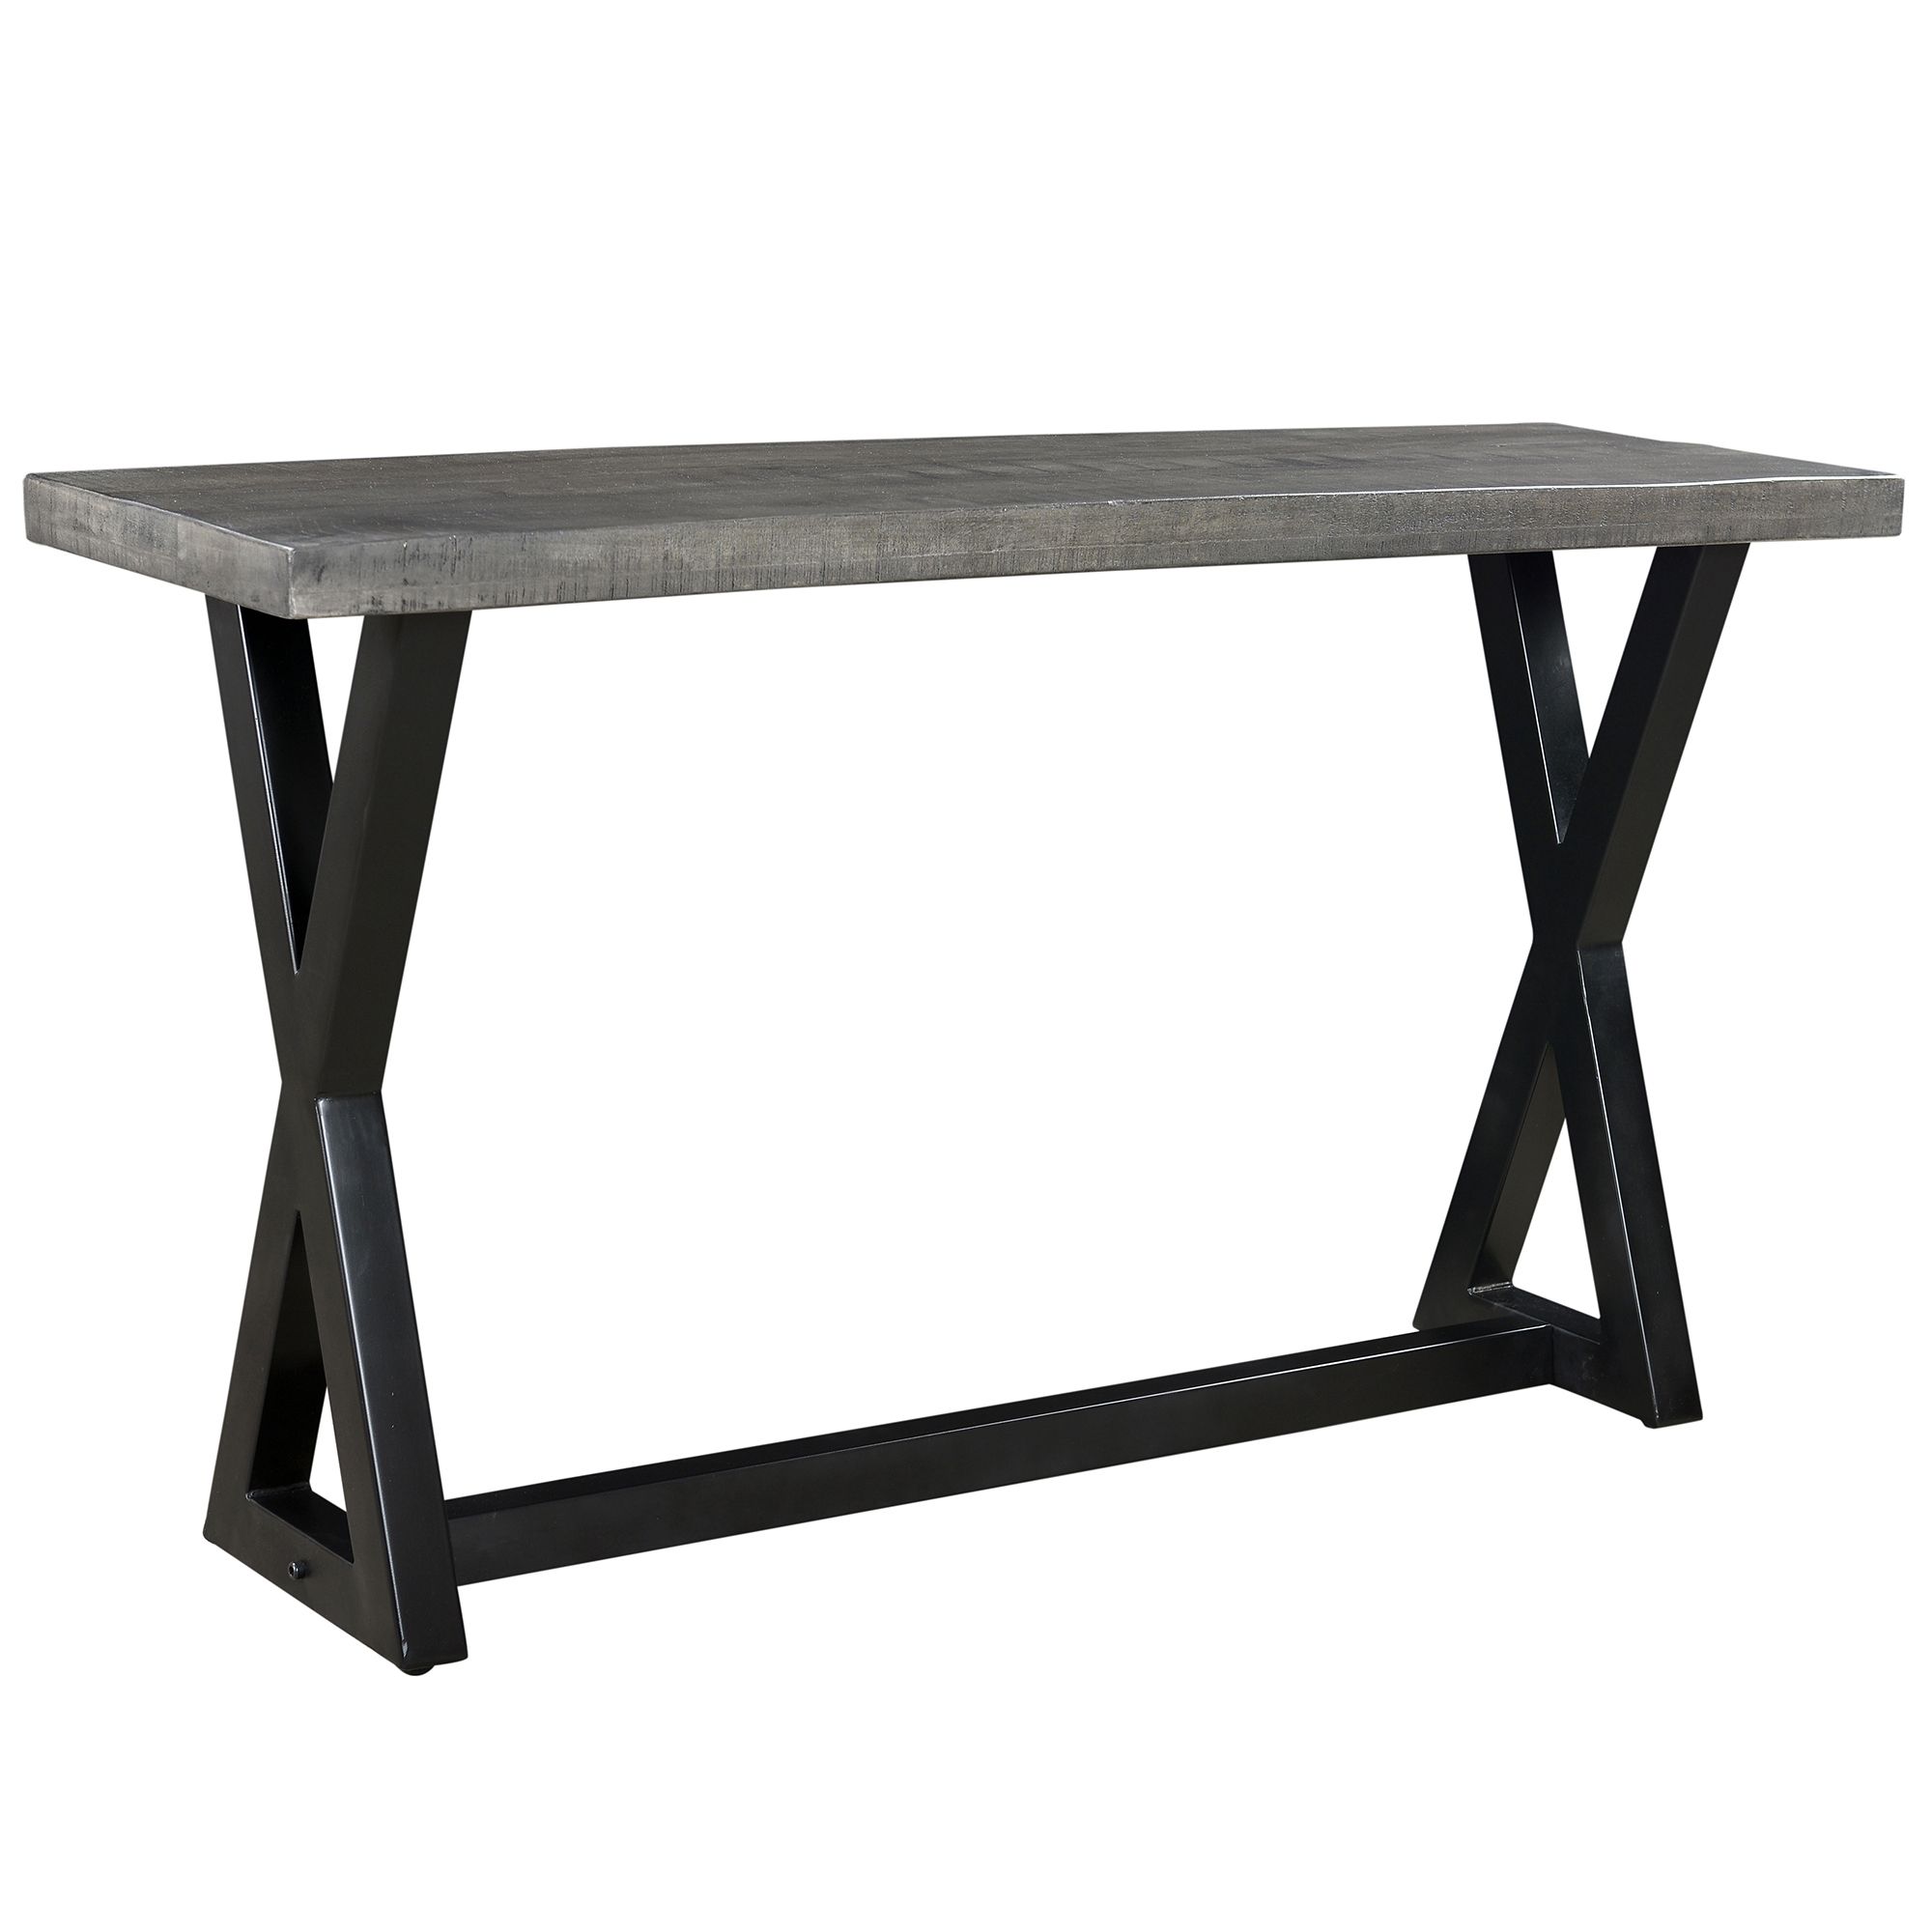 Zax Console Table In Distressed Grey – Aux Merveilles Intended For Metal Console Tables (View 6 of 20)